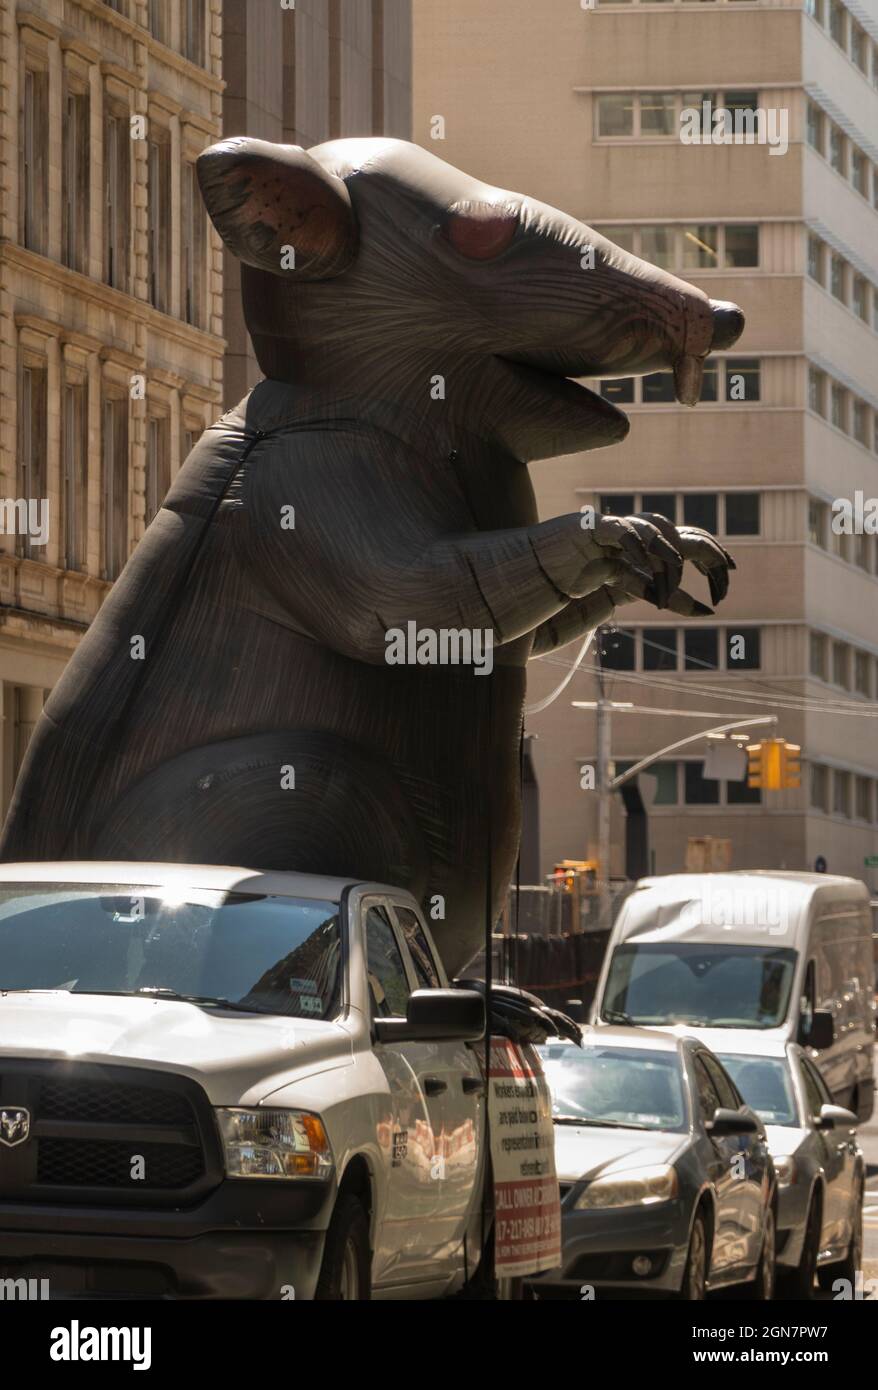 scabby the protest rat on Manhattan street NYC Stock Photo